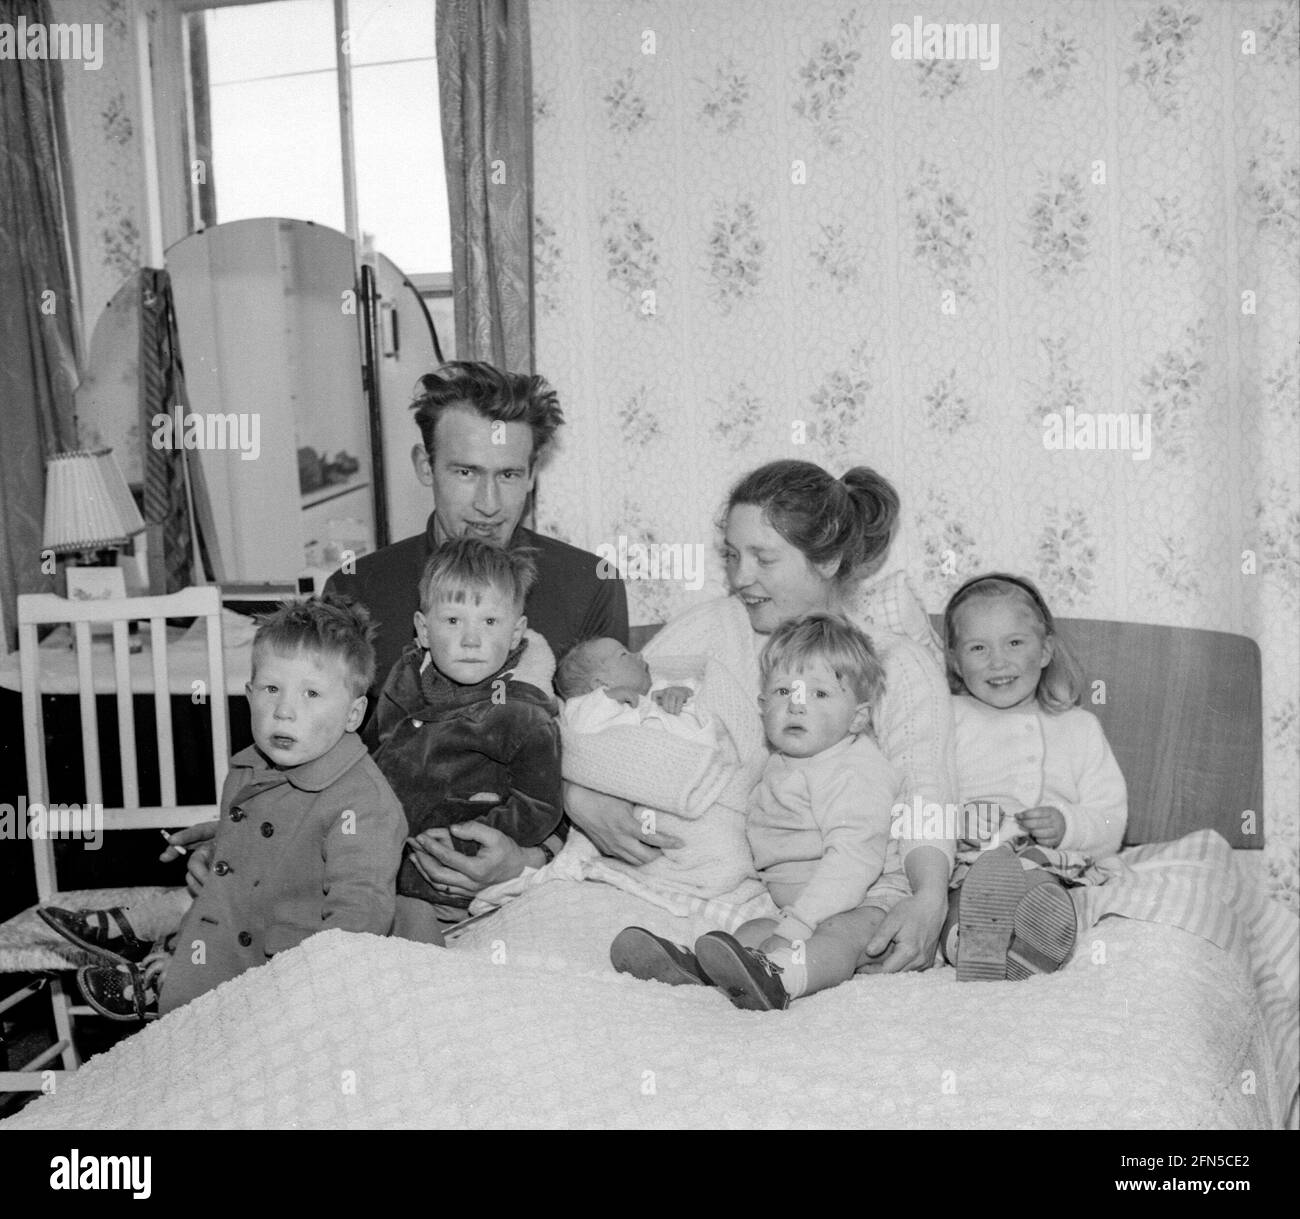 A young couple and their five young children sit on a bed in the room they all share typifies the British housing crisis in the 1950s. In the decades after World War II a huge programme of Council house building took place to remedy this crisis. Stock Photo